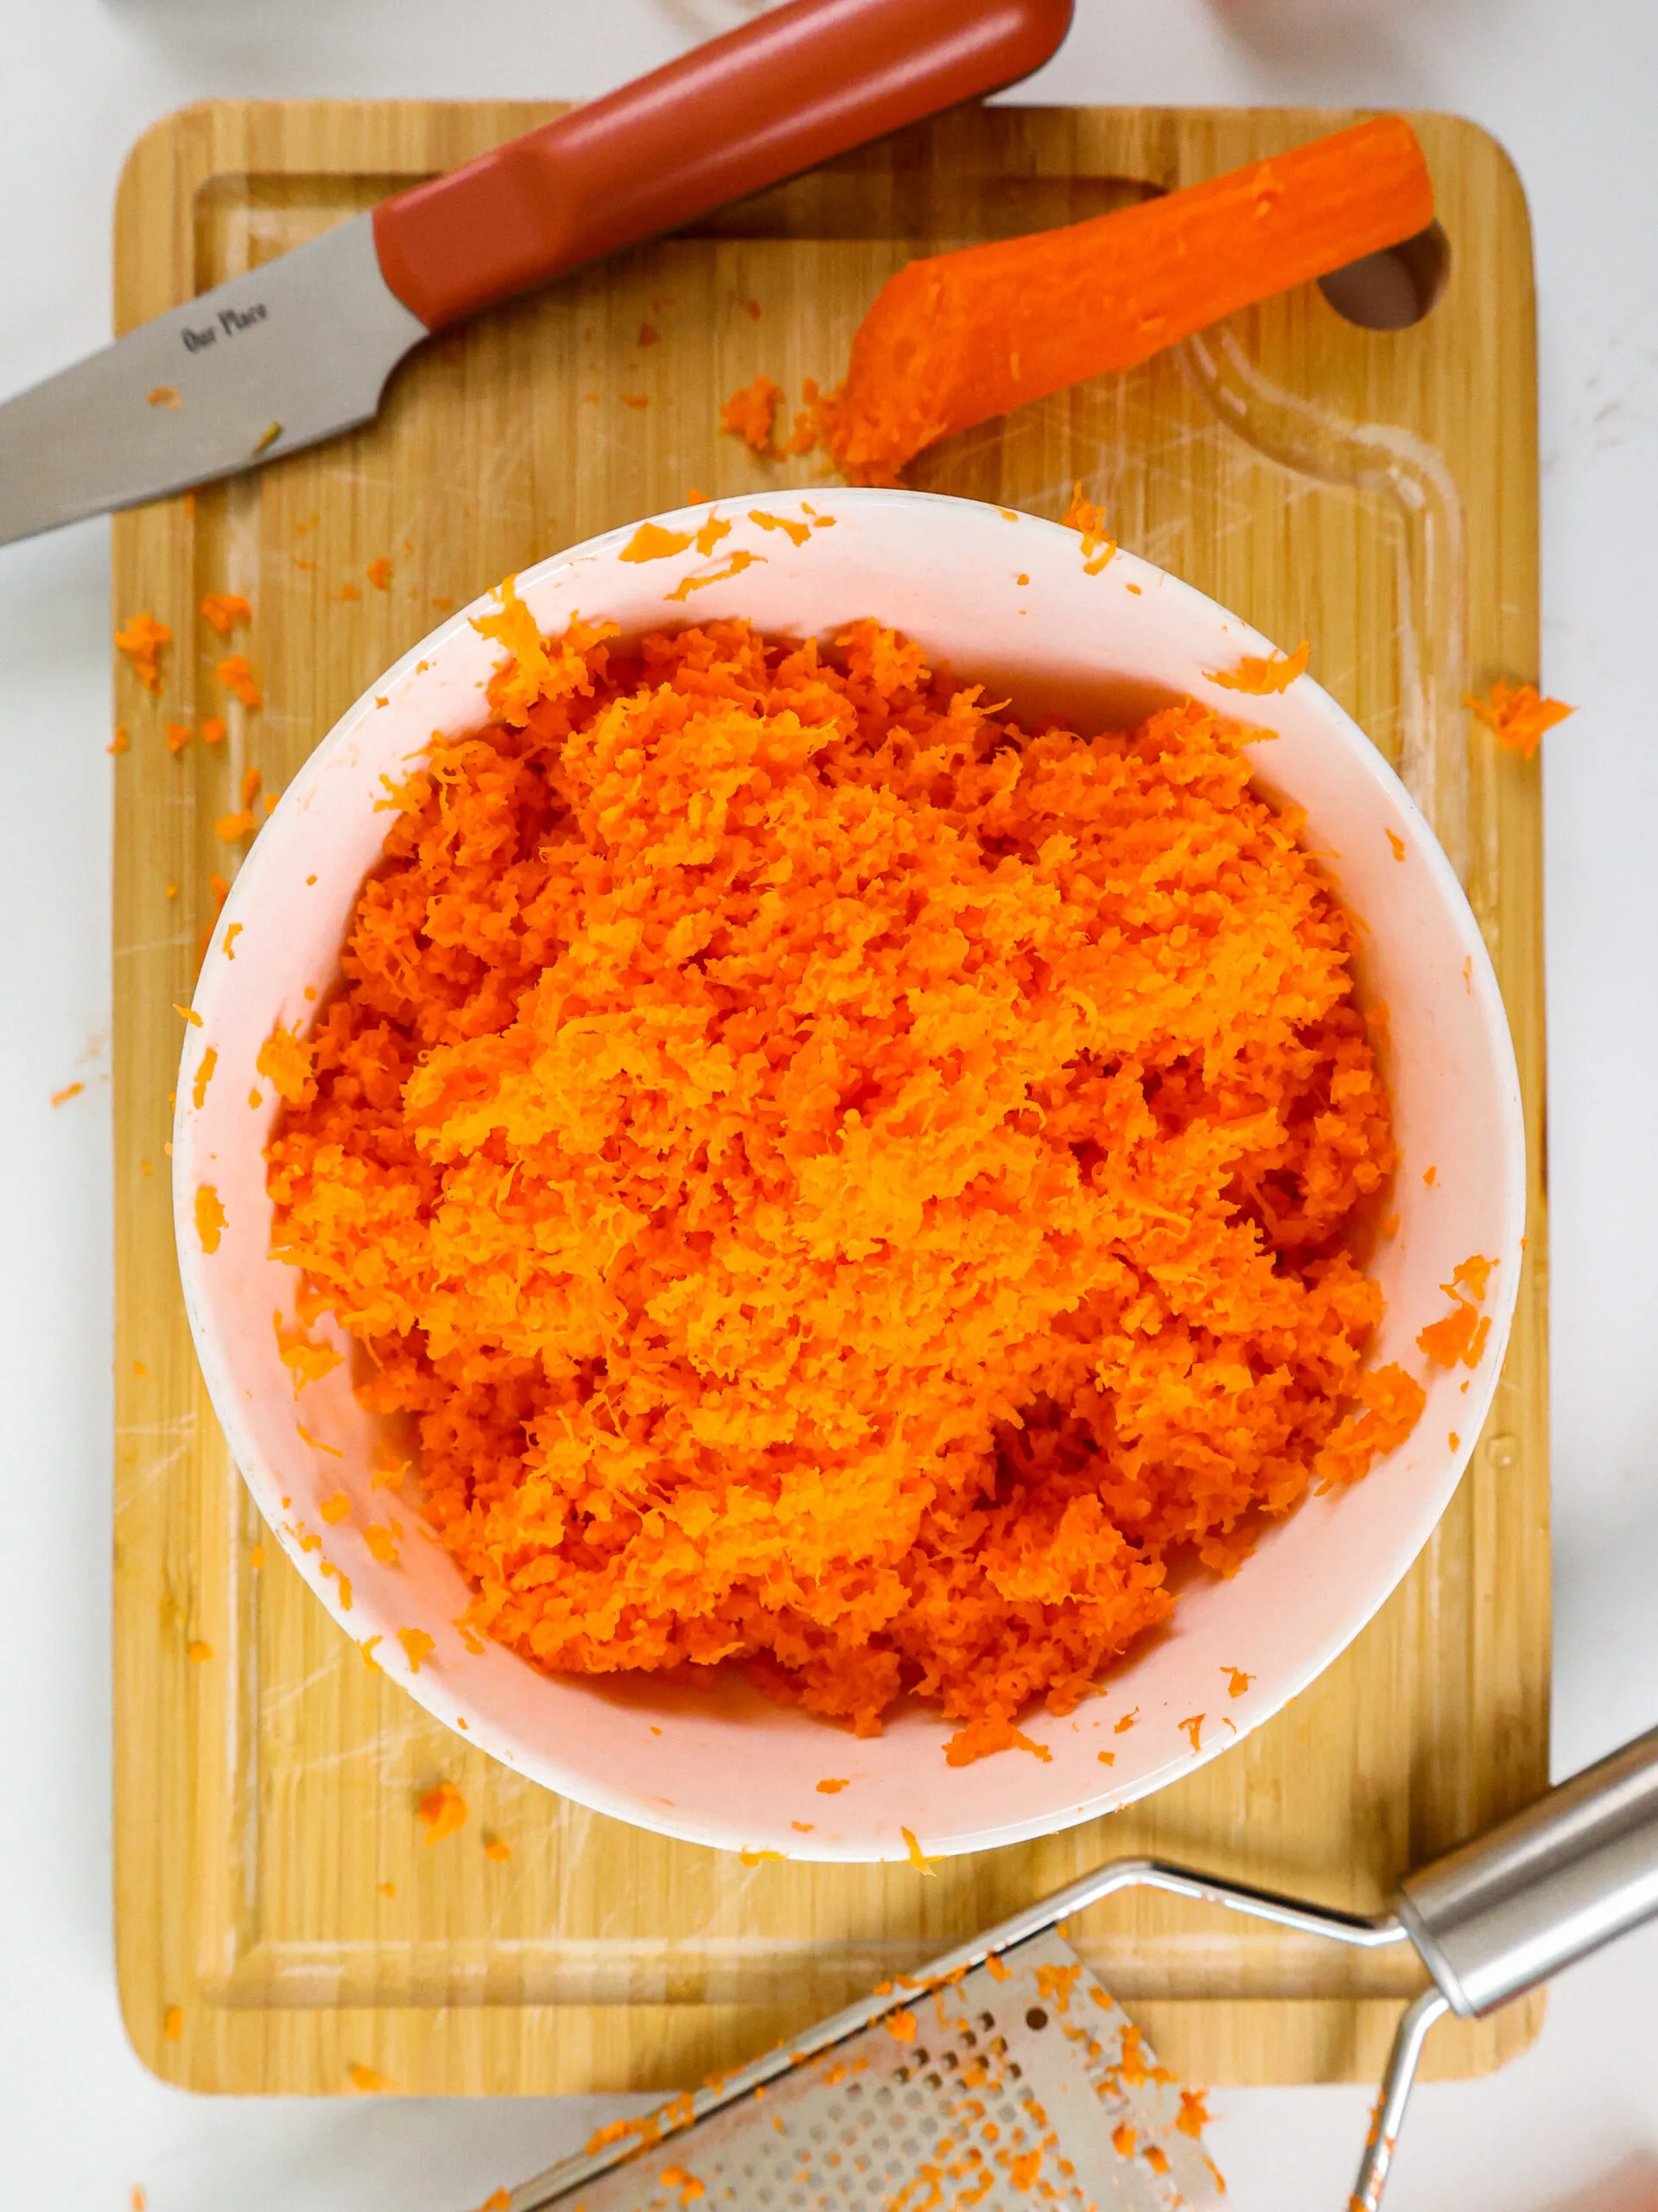 image of finely shredded carrots that were shredded using a microplane grater